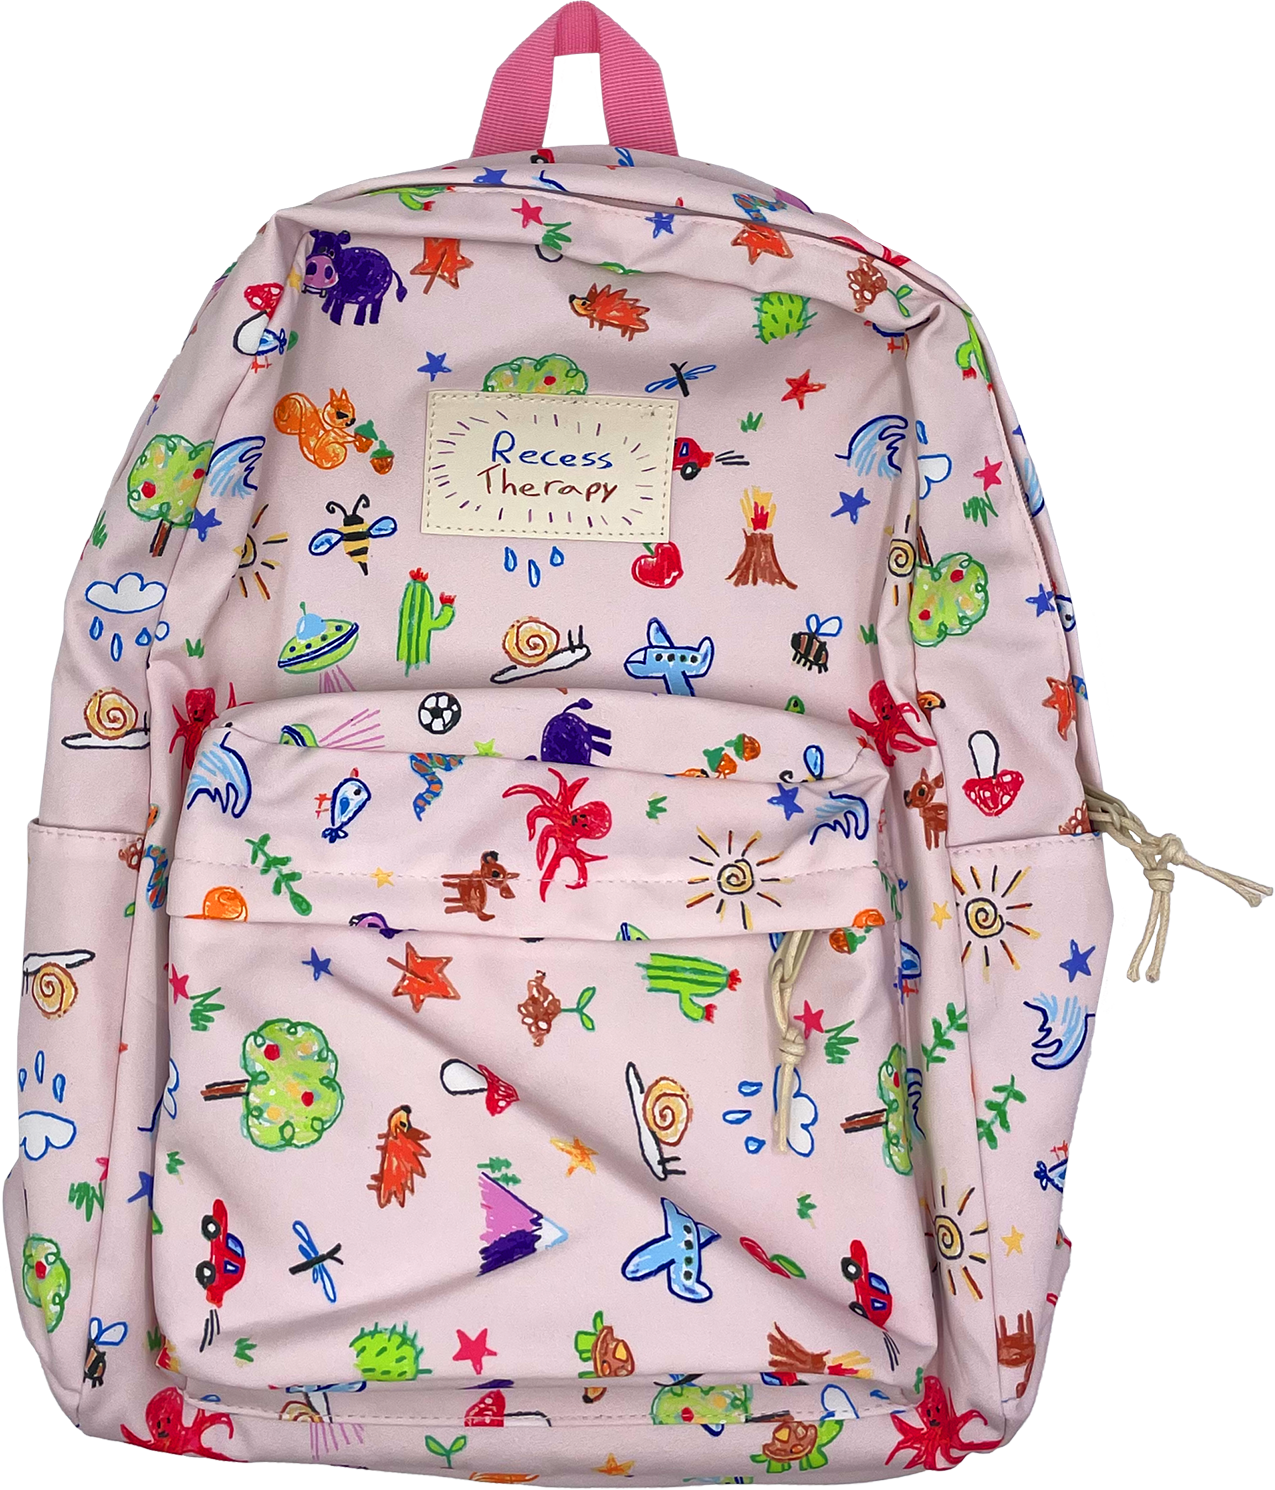 Limited Edition Recess Therapy Backpack